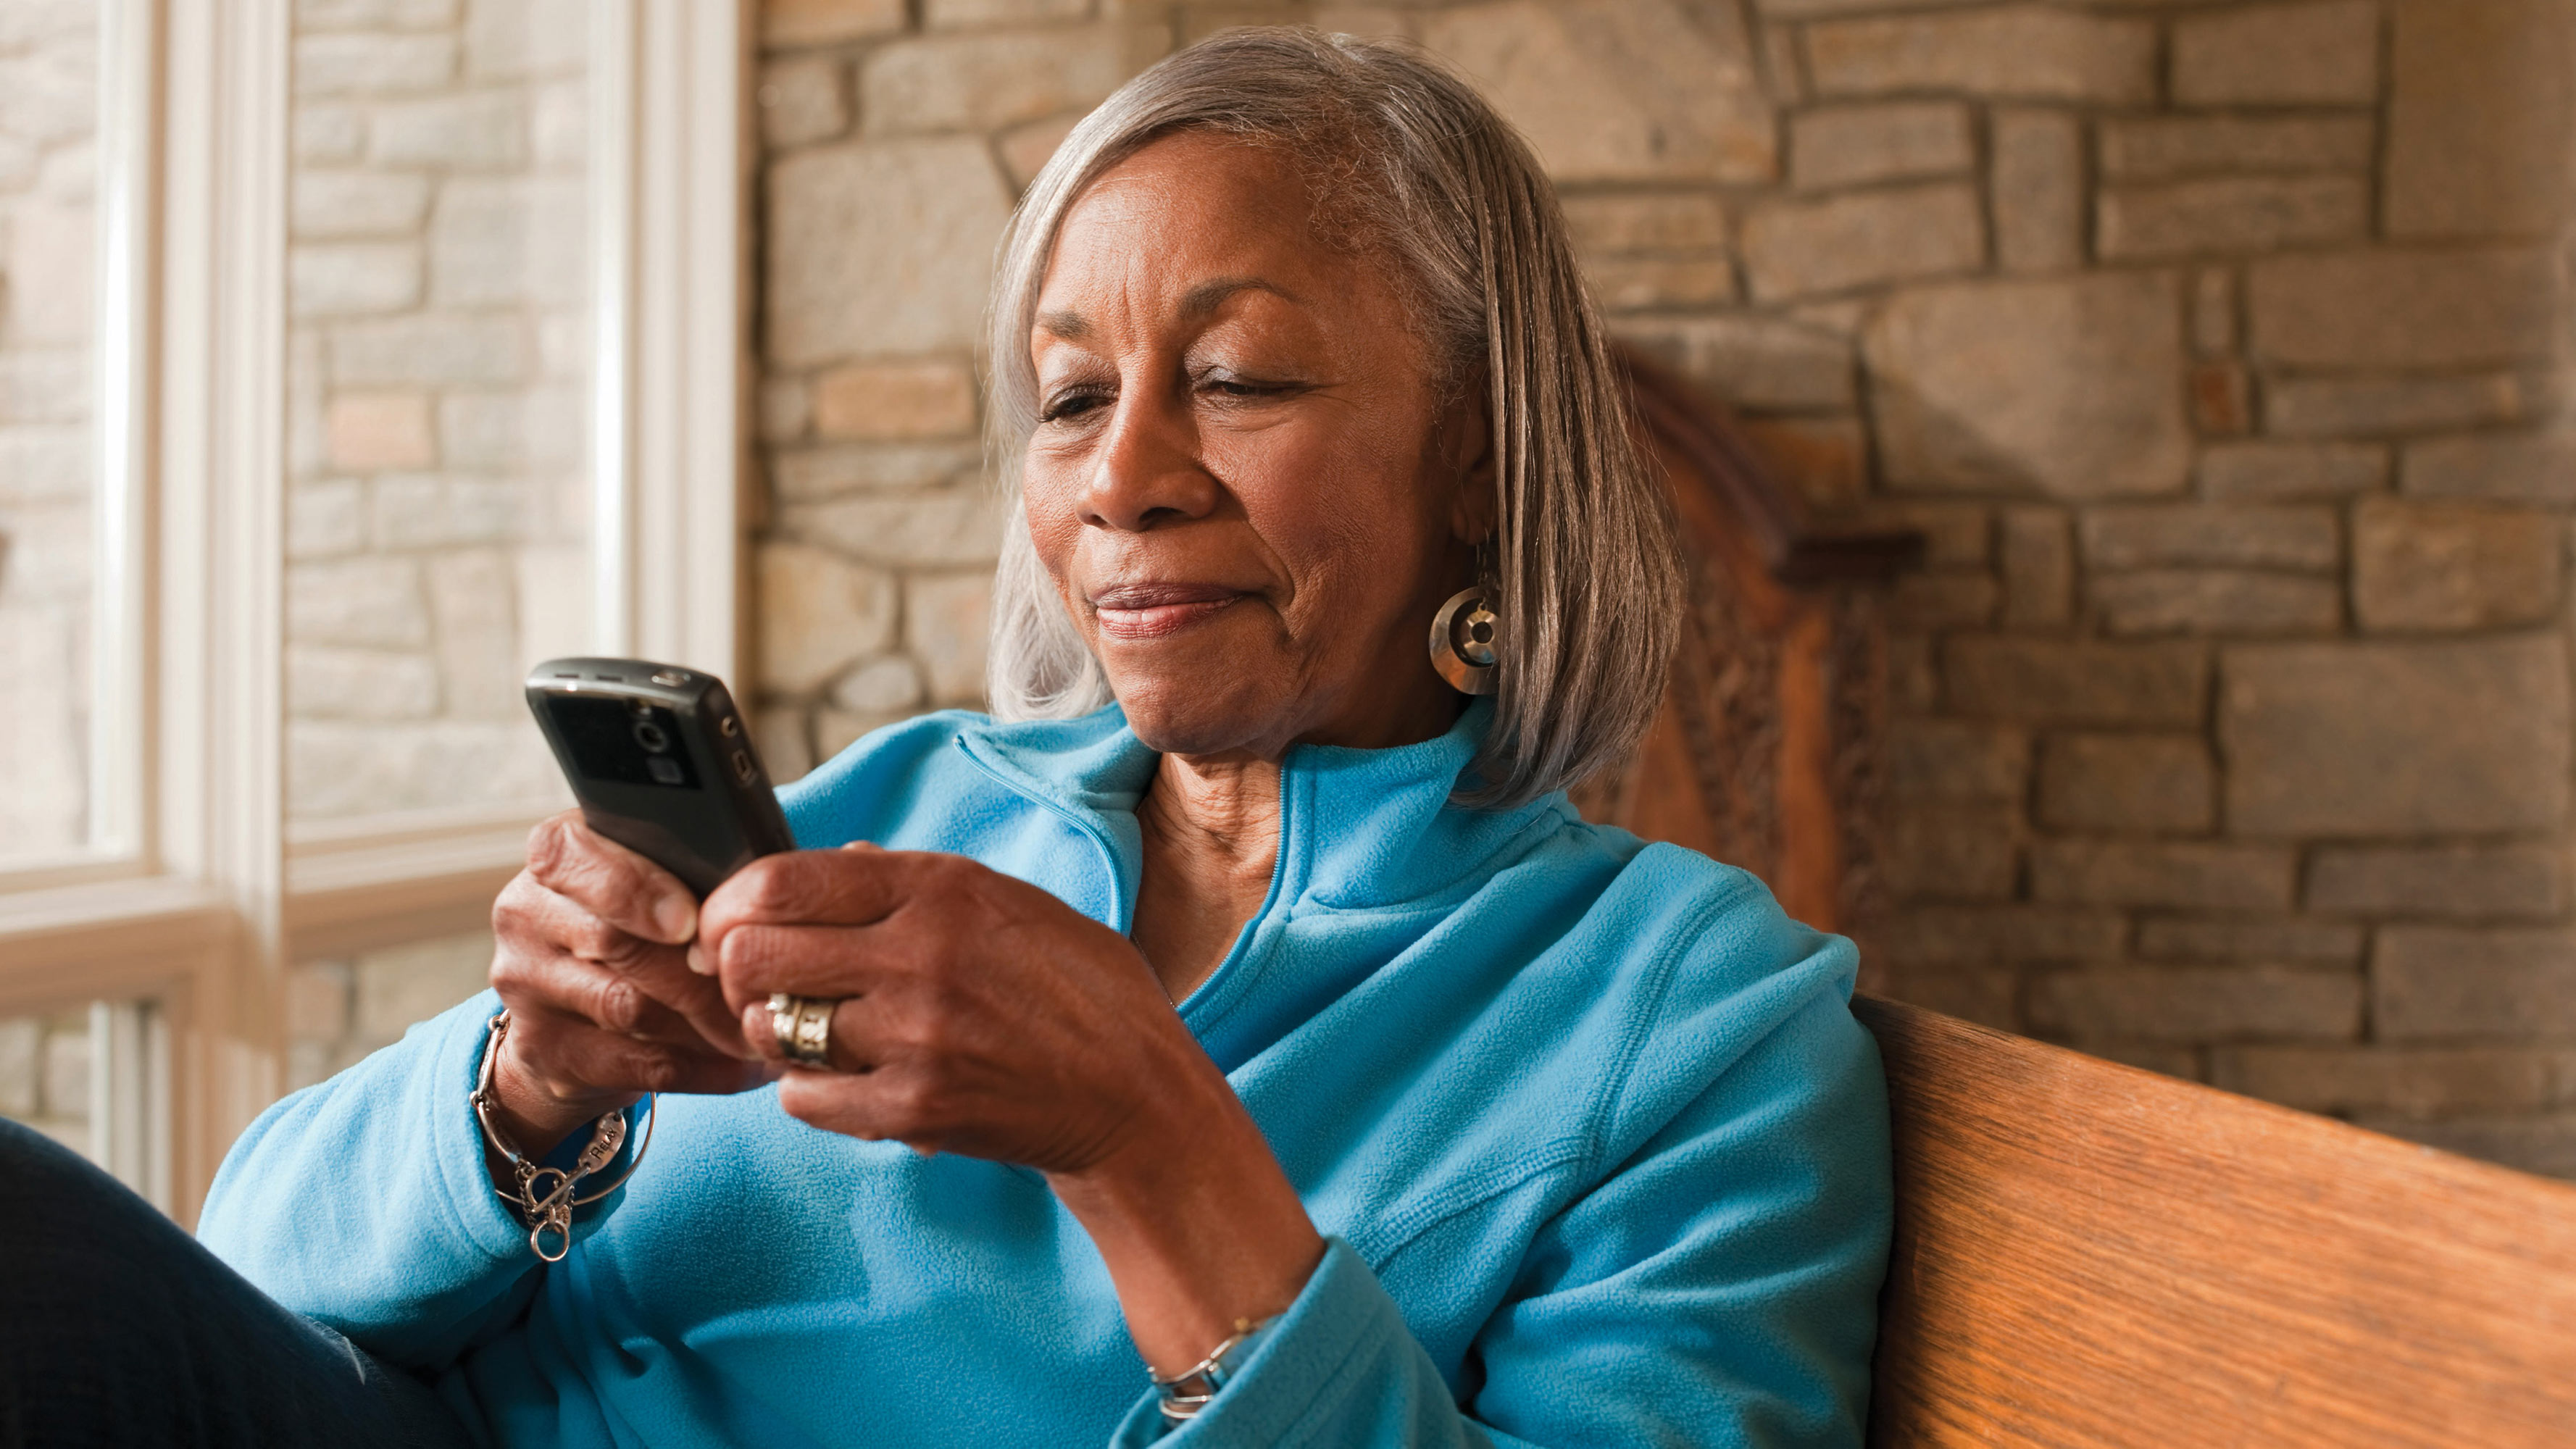 A mature woman uses a smartphone to read materials about health care.